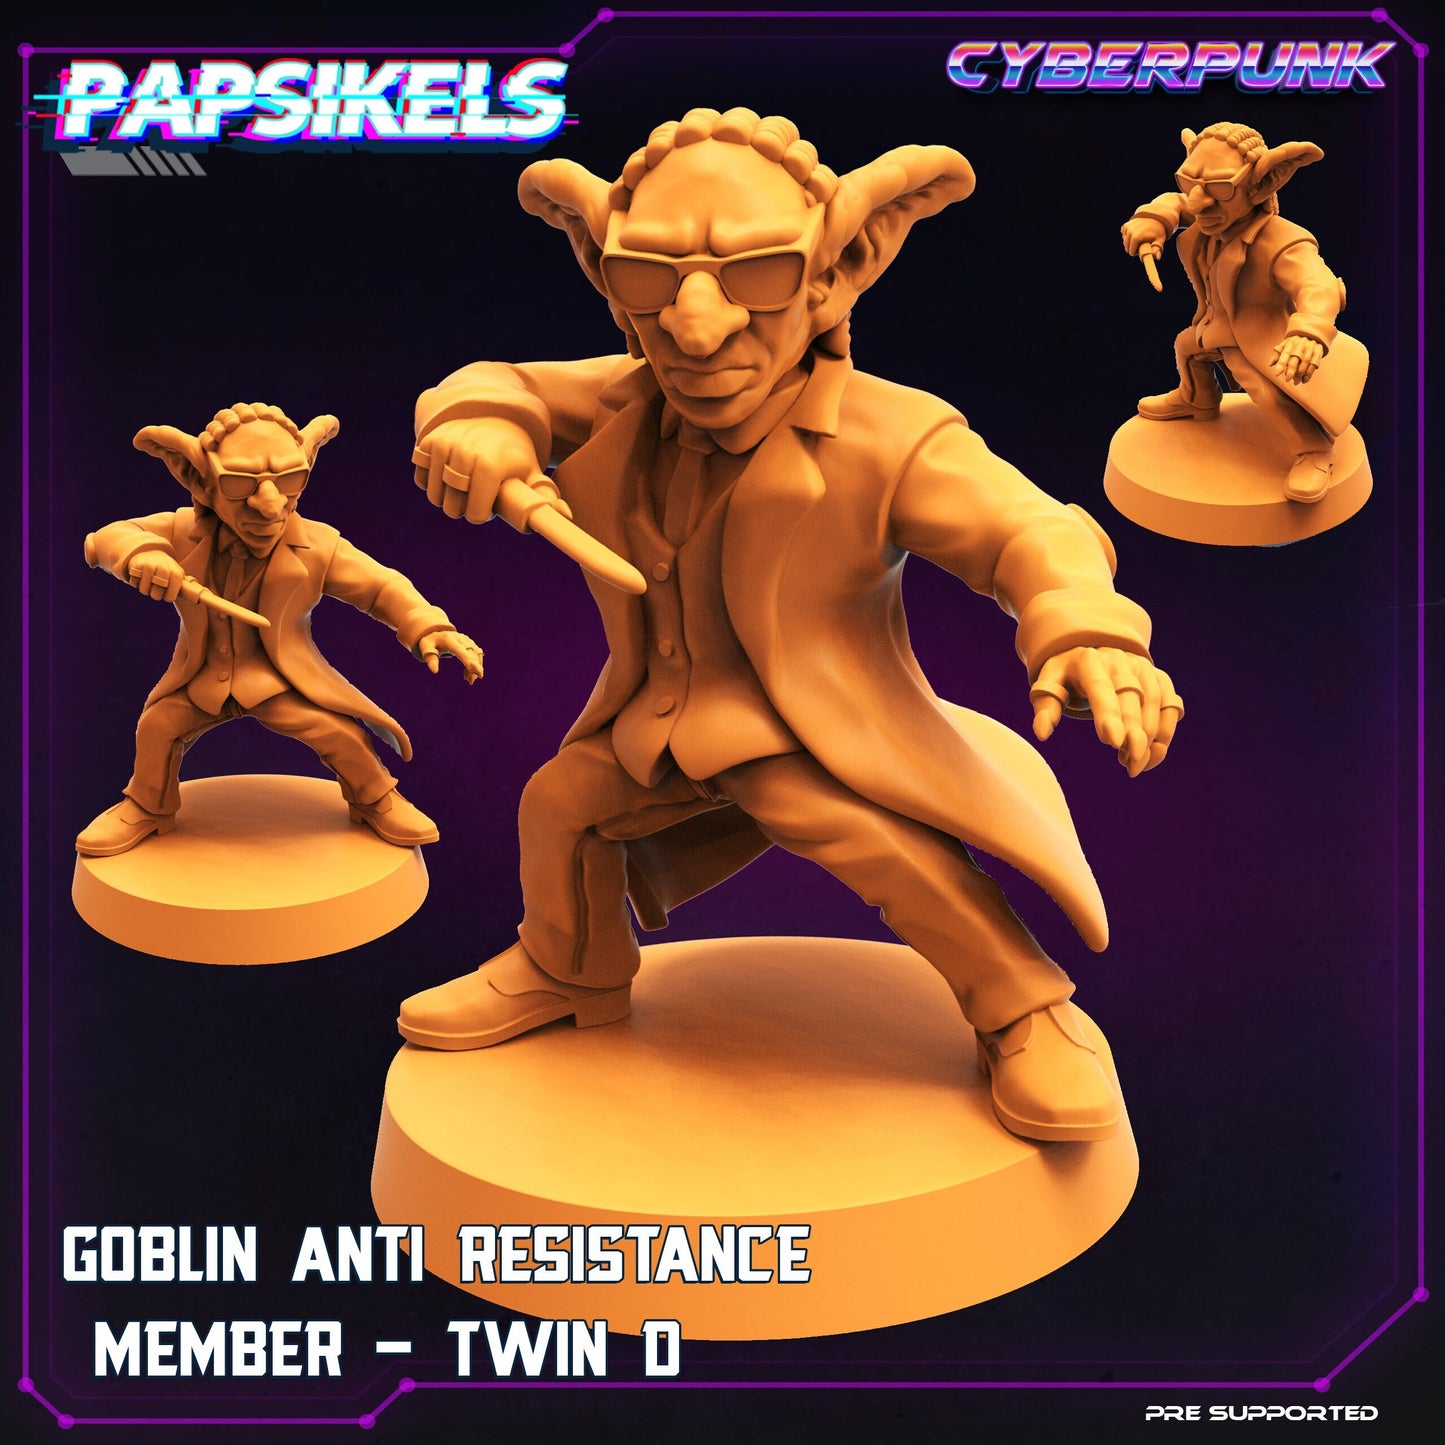 Goblin Anti Resistance Member - Twin D (sculpted by Papsikels)